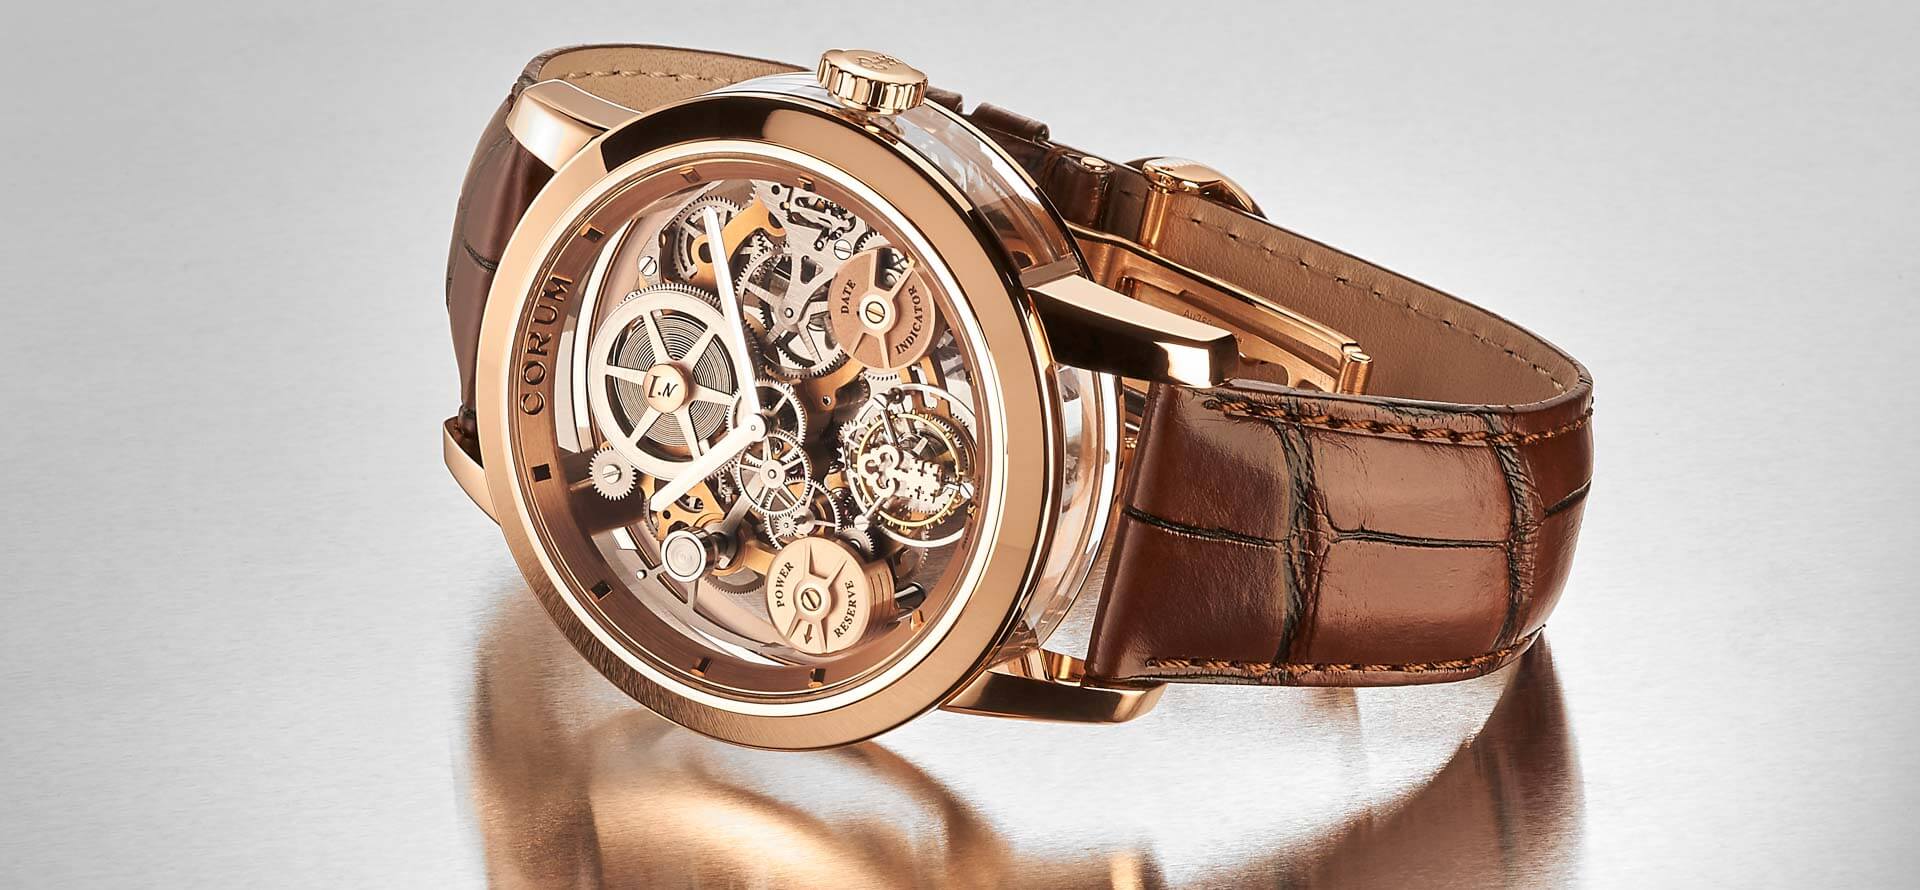 Limited Edition Corum LAB02 Skeleton Watch Comes With Flying Gear Train